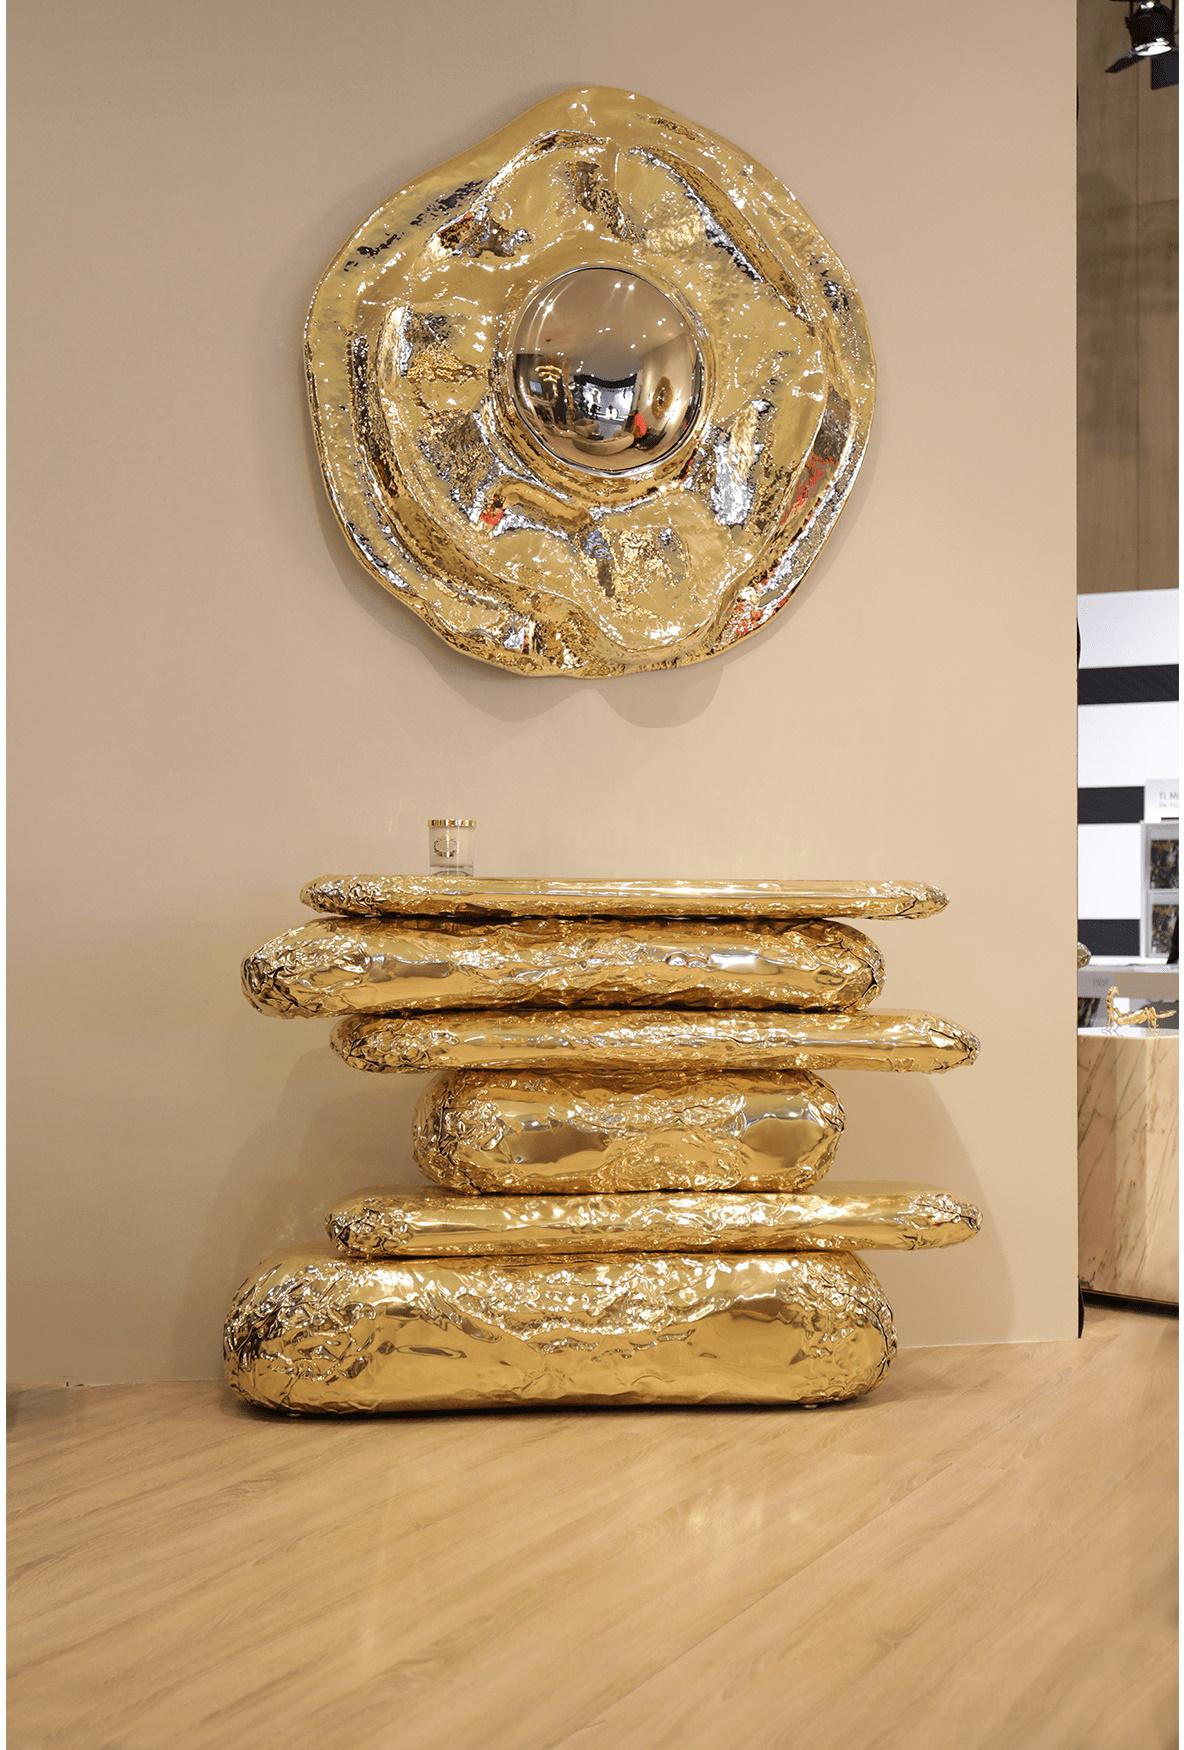 Mirror pearl
Casted brass, niquel plated stainless steel.
Estimated production time: 15- 16 weeks
Measures: Height: 15 cm
Width: 110 cm.